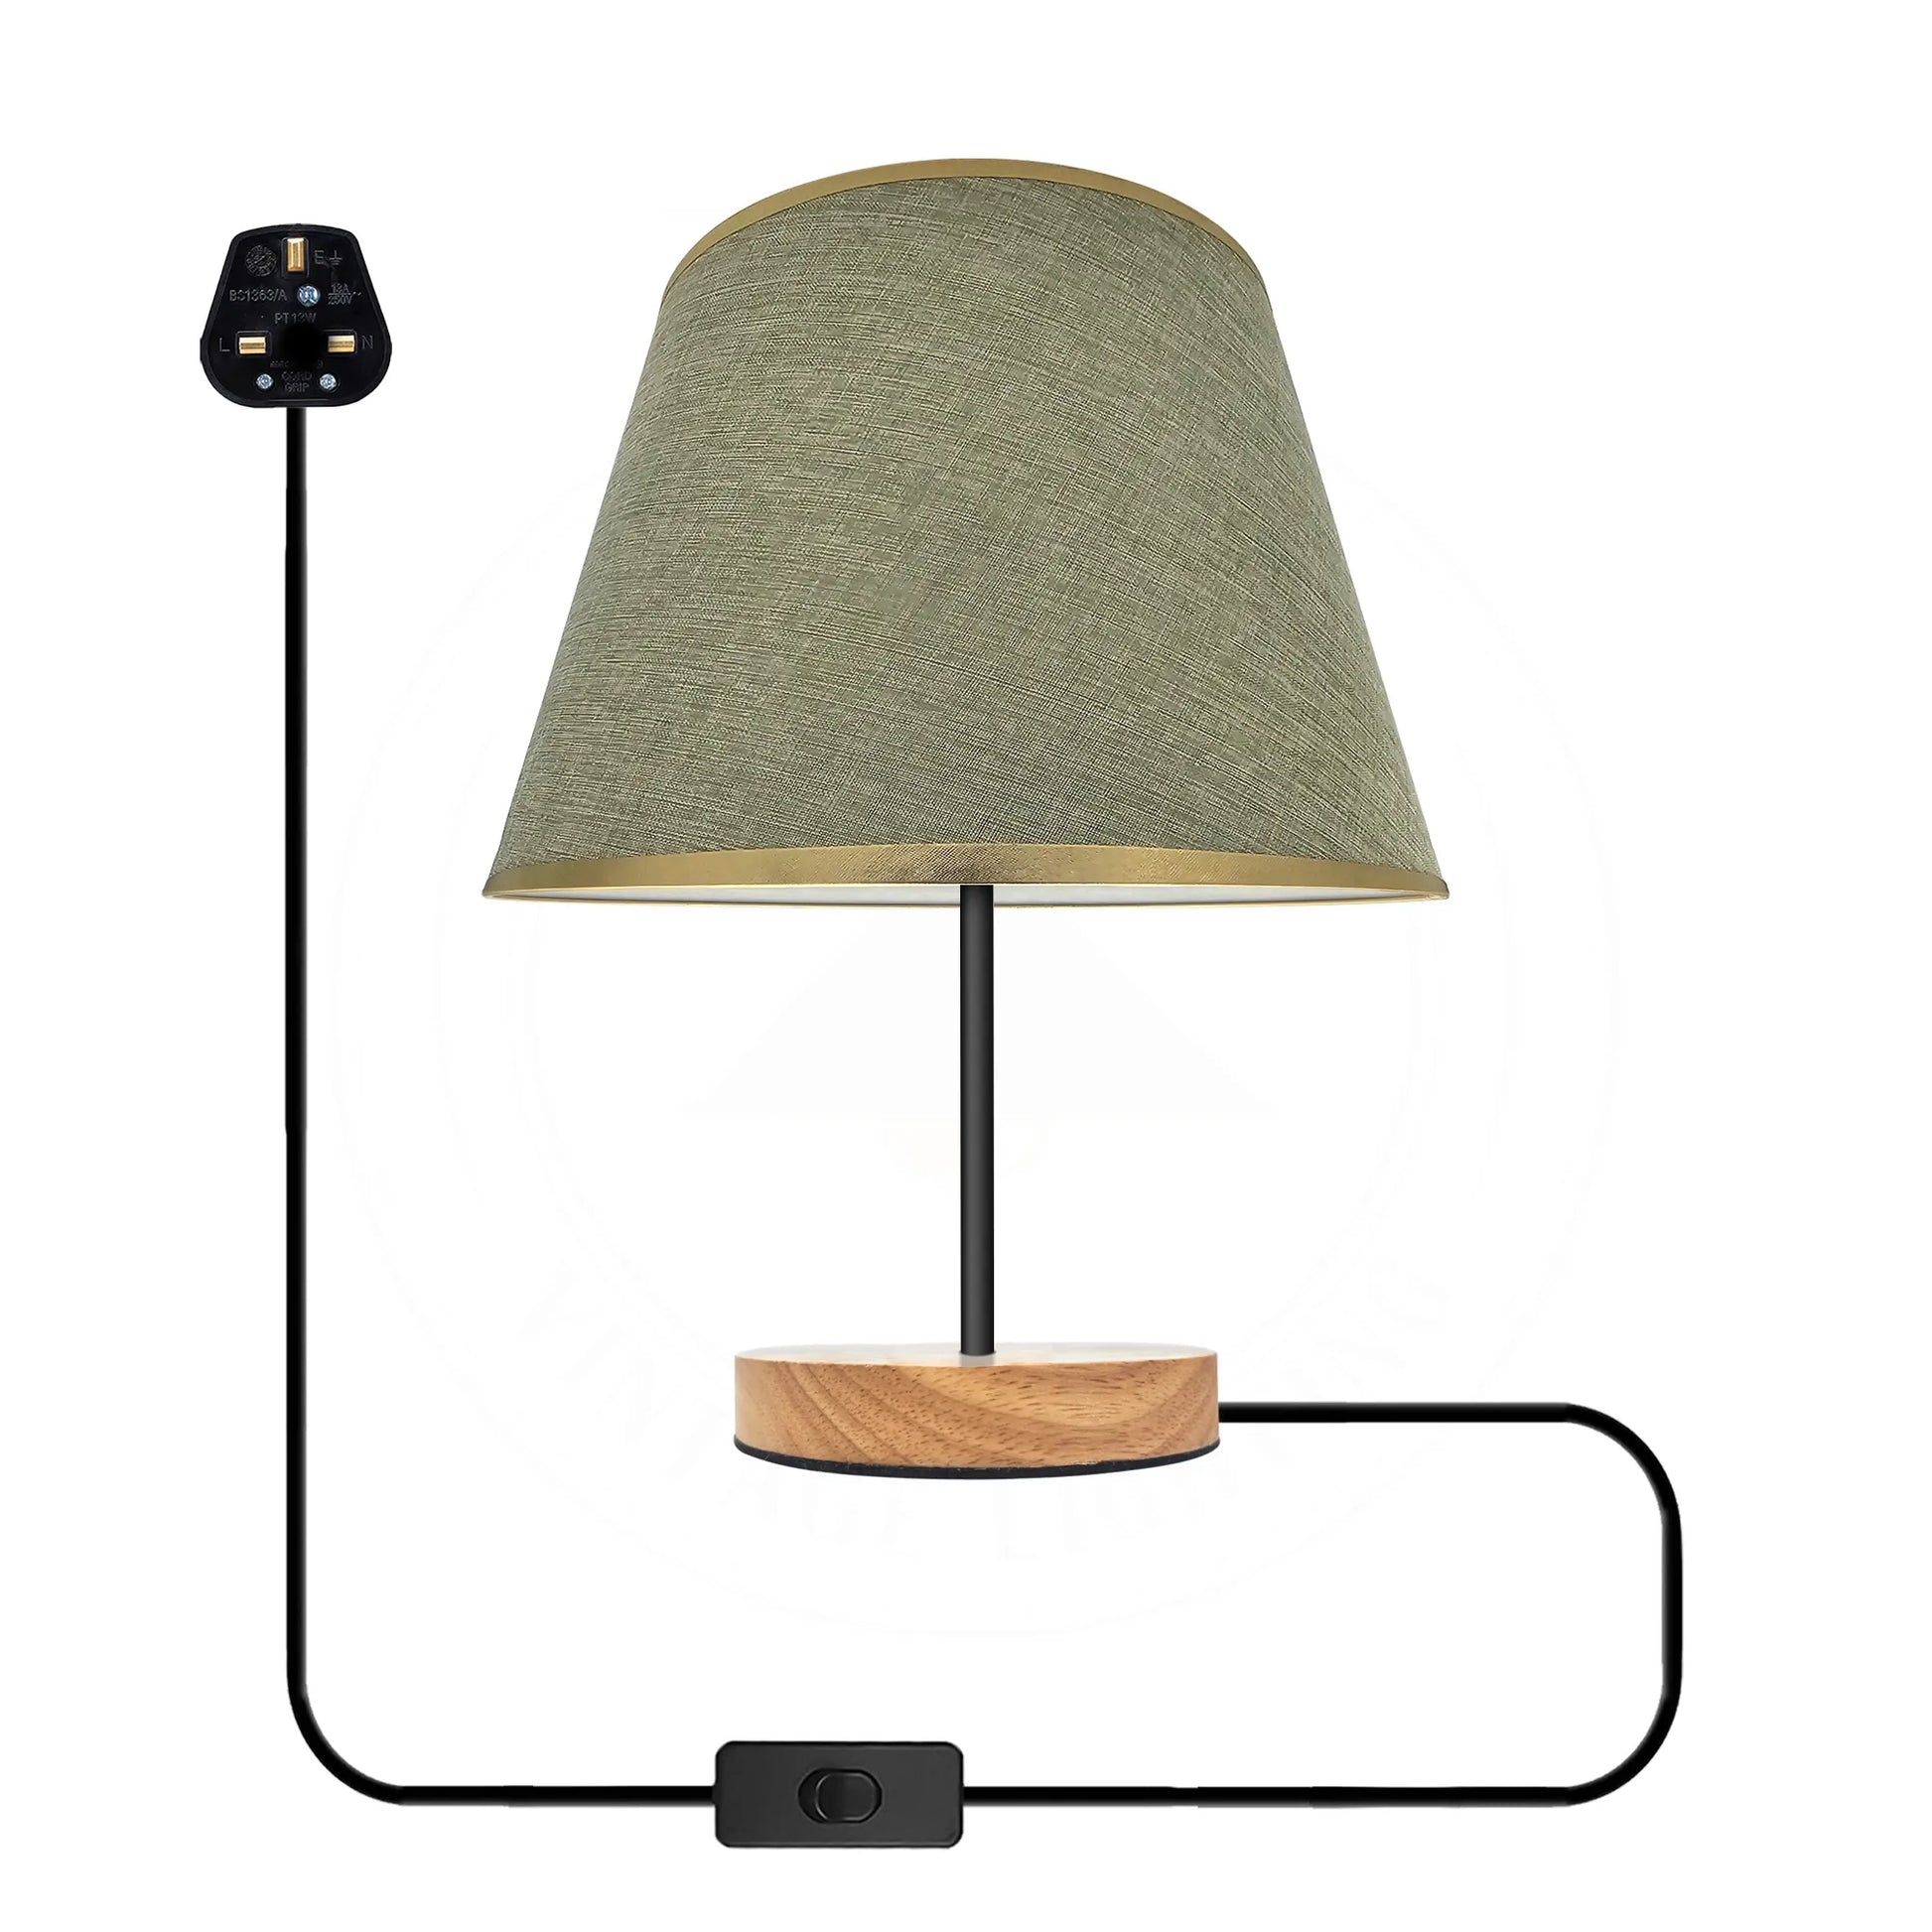 3 Pin Plug in Wooden Base Lampshade